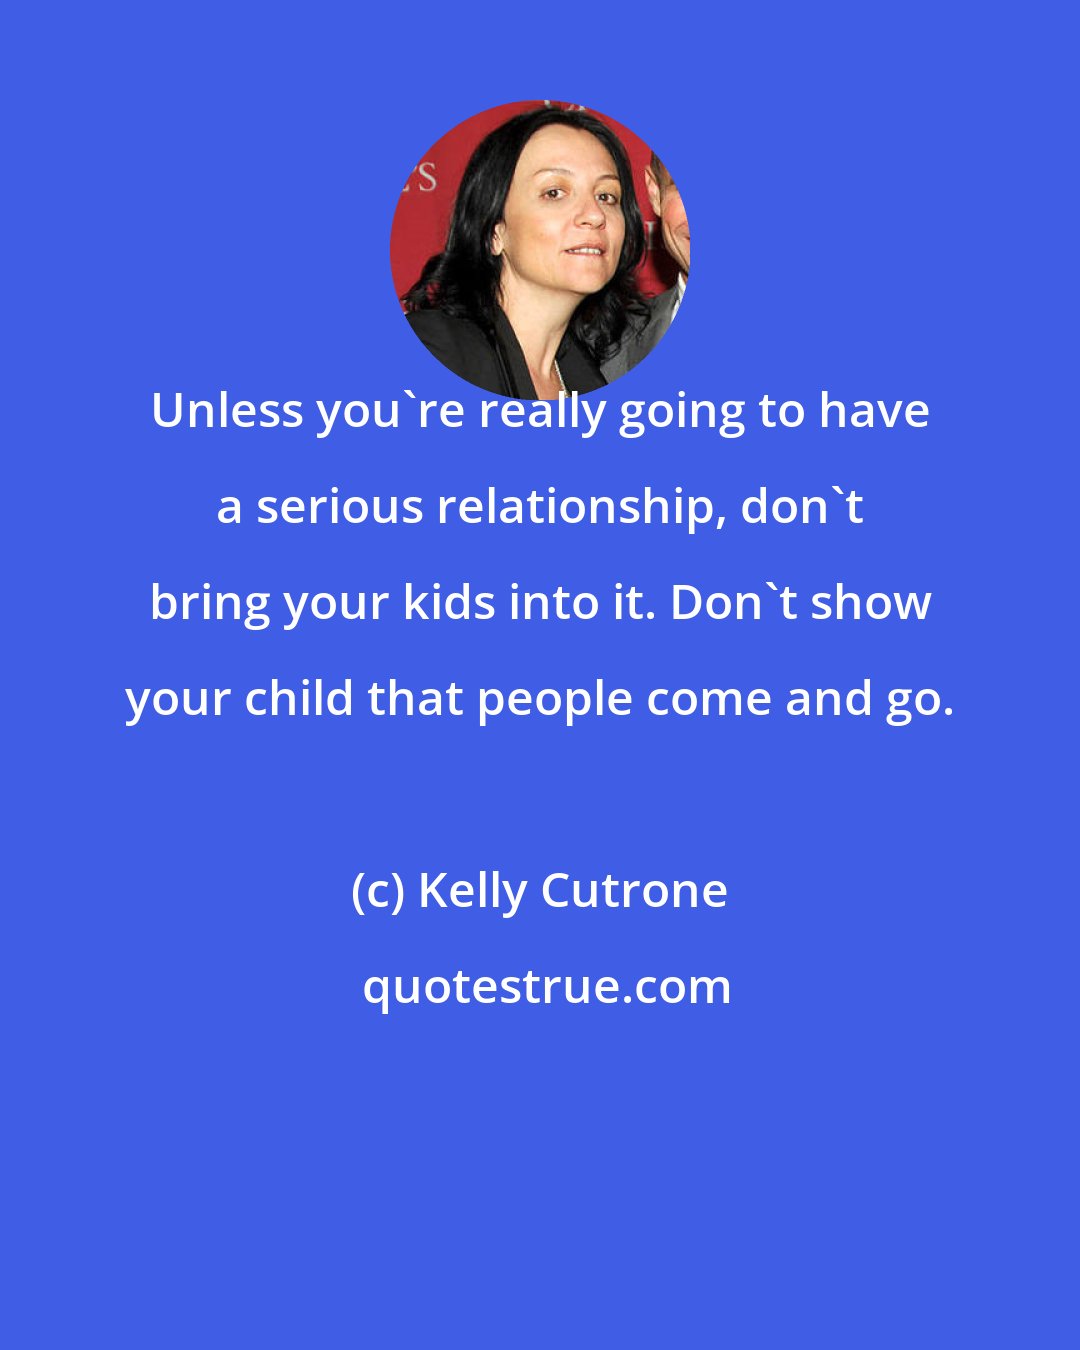 Kelly Cutrone: Unless you're really going to have a serious relationship, don't bring your kids into it. Don't show your child that people come and go.